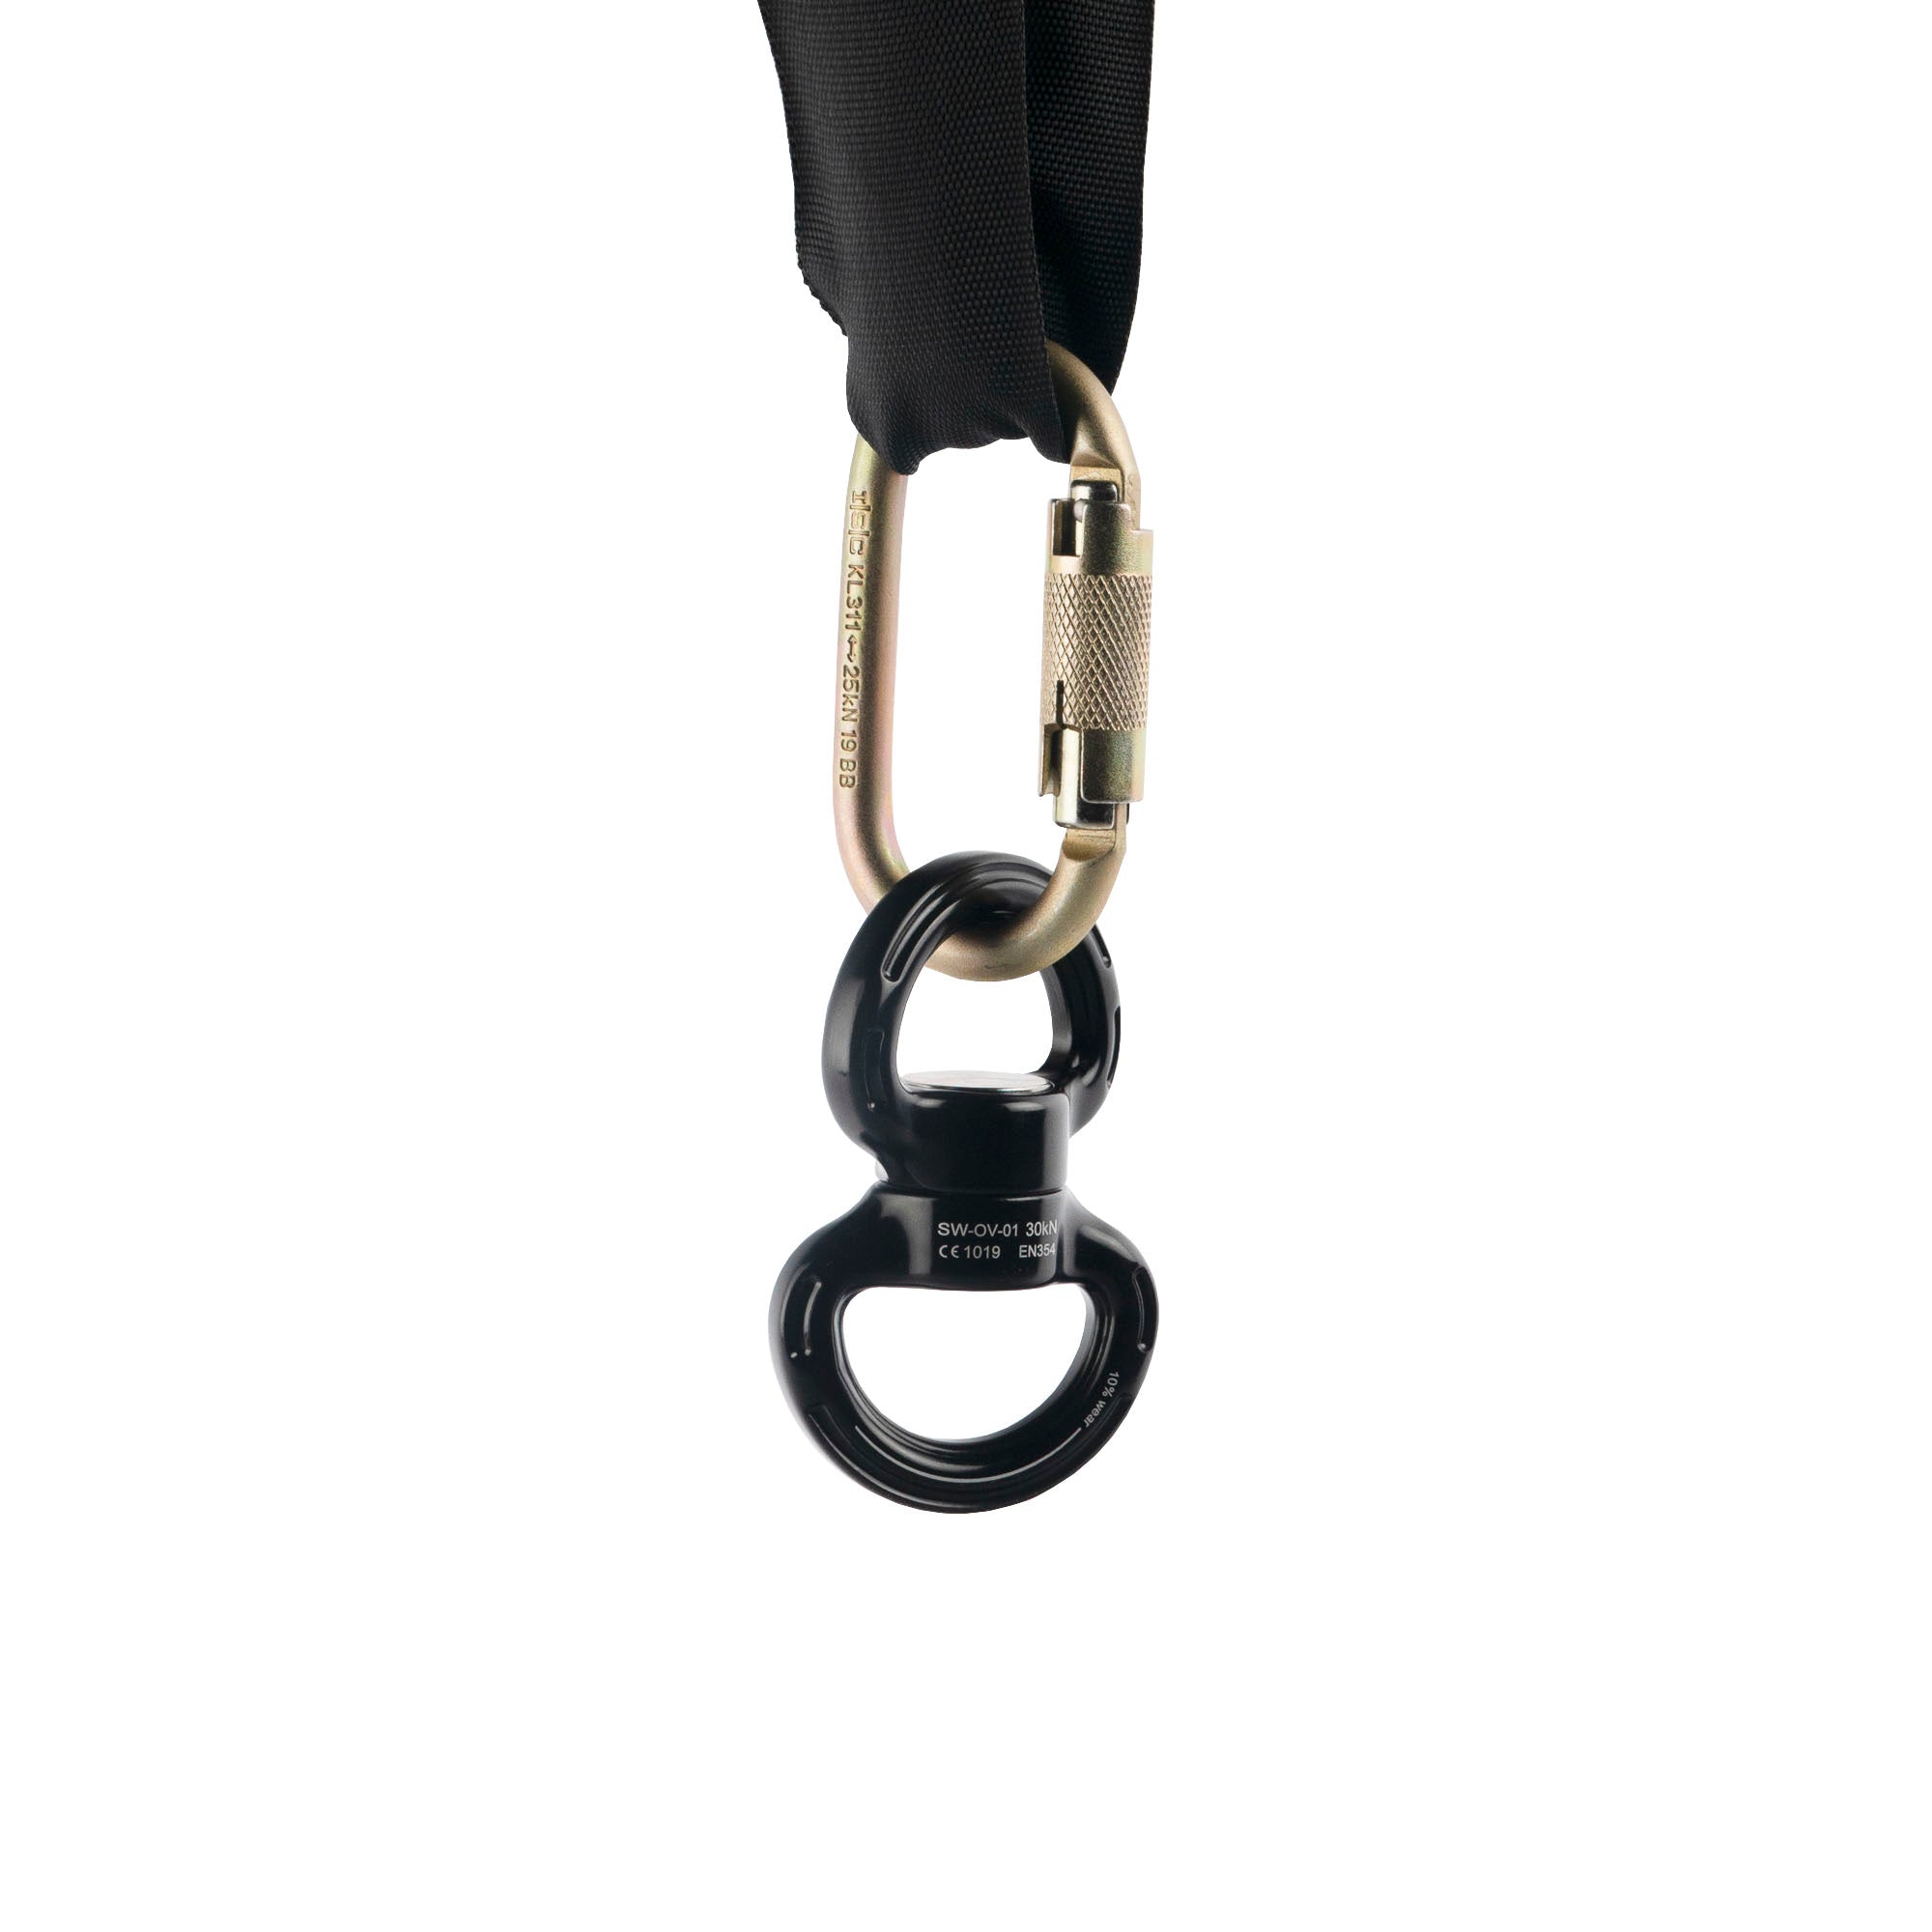 Large prodigy swivel connected to a carabiner